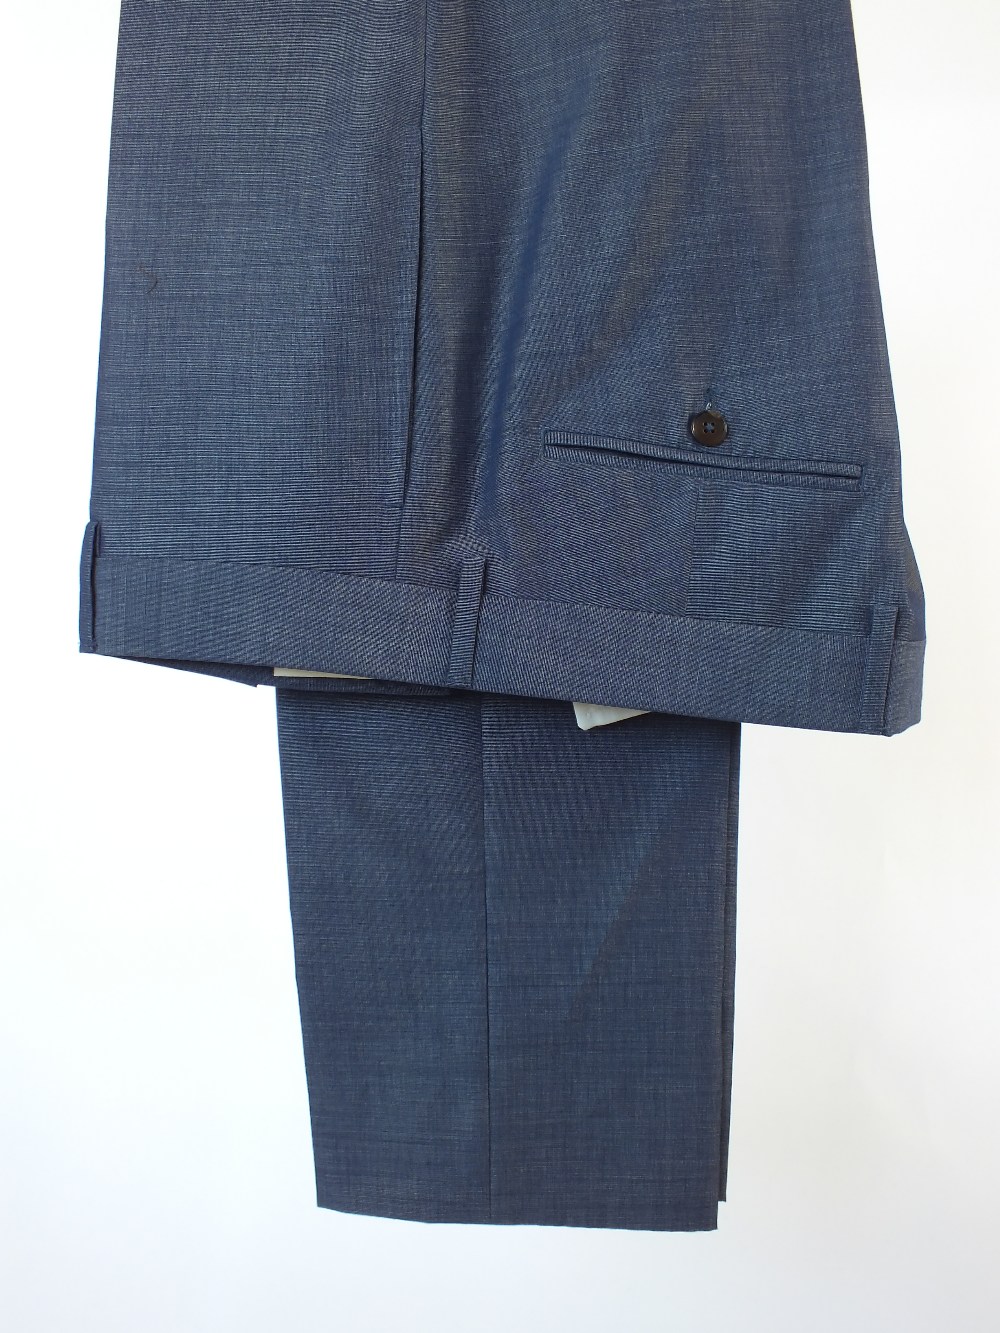 A Gucci suit, blue, brown buttons, single vent, Italian size 52R, 65% cotton, 35% mohair, Gucci - Image 6 of 8